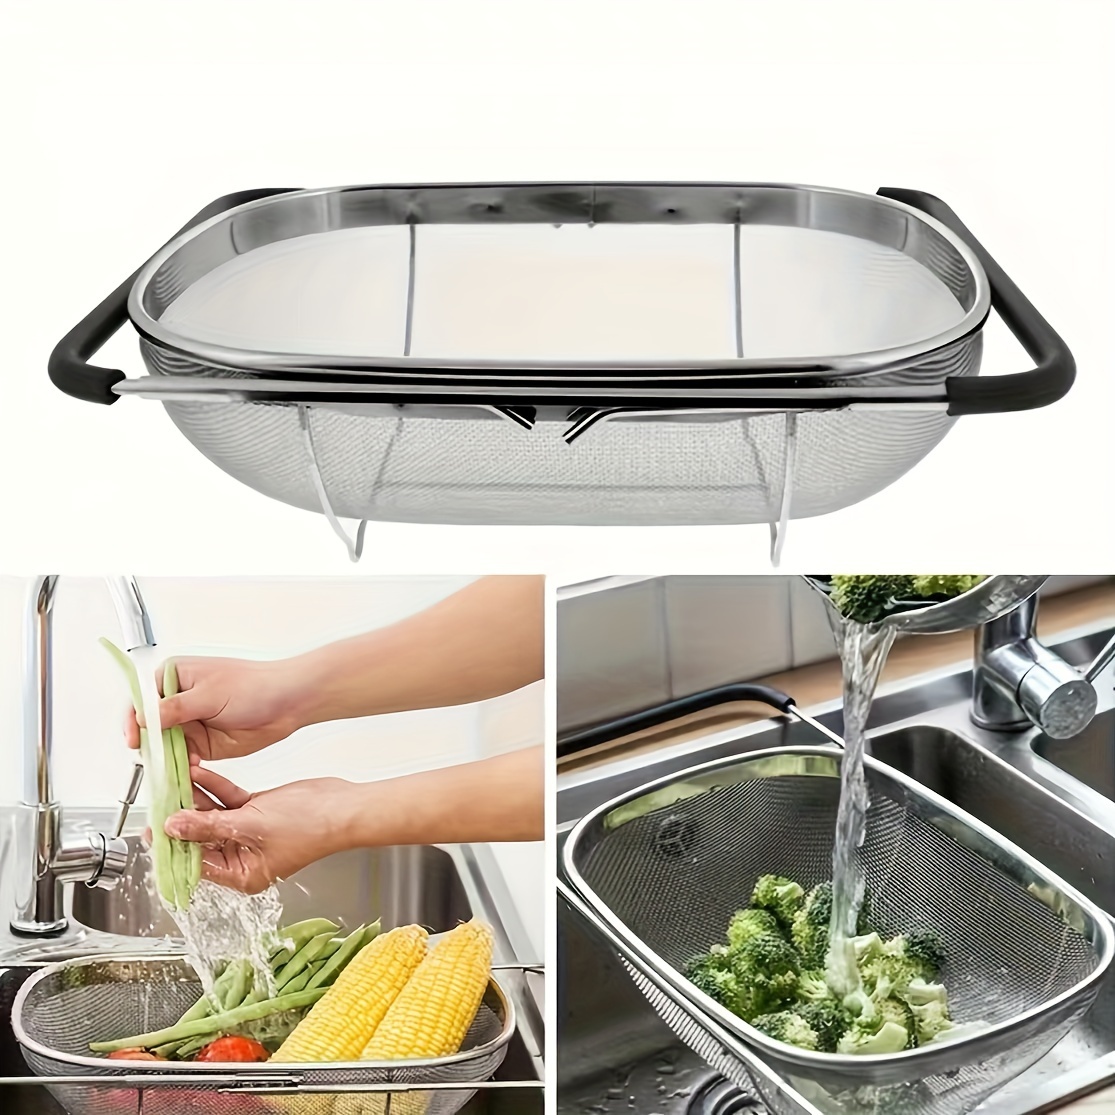 

1pc, Over The Sink Stainless Steel Oval Colander, Telescopic Mesh Basket, Stainless Steel Sink Drain, Perfect For Washing Fruits & Veggies, Telescopic Strainer Basket, Kitchen Stuff, Kitchen Gadgets